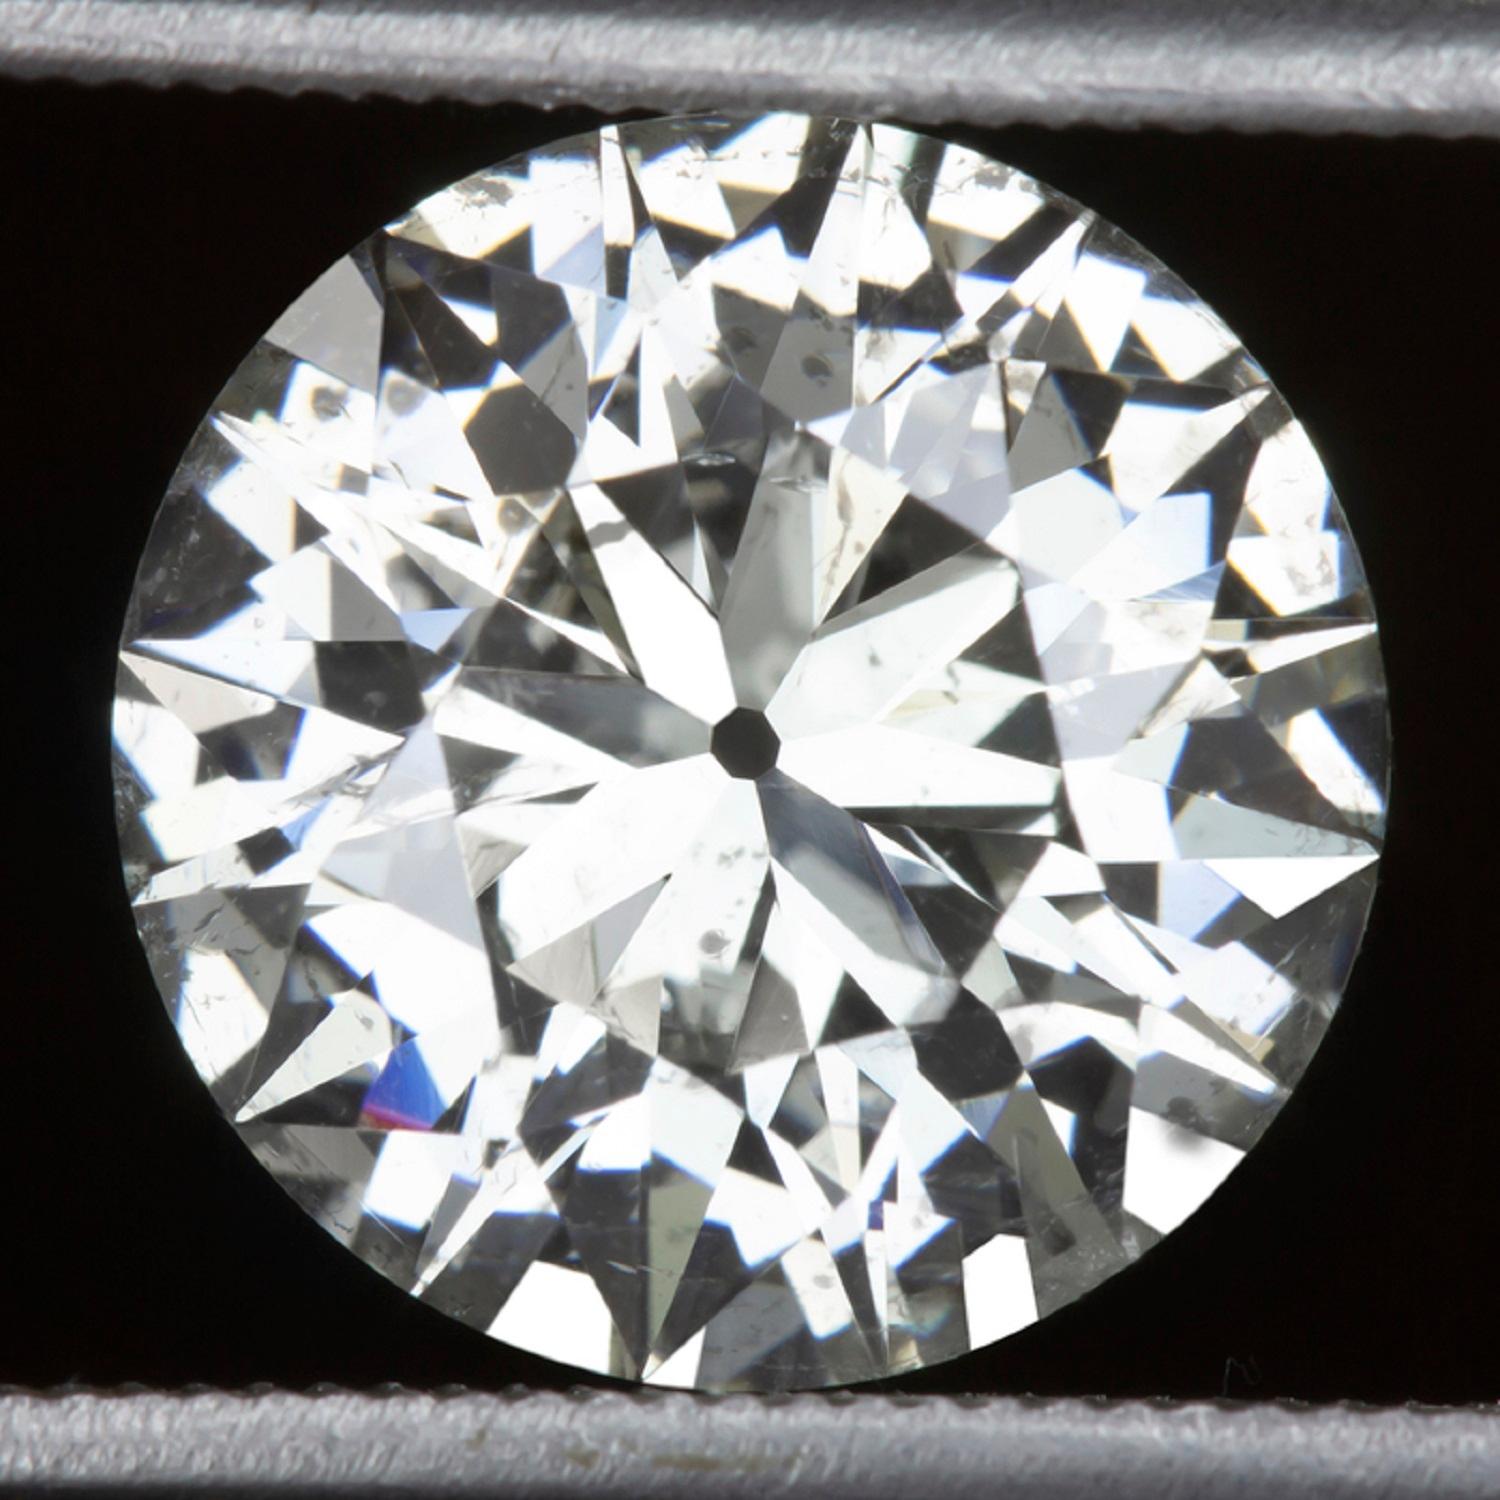 GIA Certified 3.27 carat old european cut certified diamond is beautifully white, eye clean, and vibrant with gorgeous life and fire. Measuring 9.14 mmx 9.64 mm in diameter, the diamond has a great spread and large look for its weight!

Cut entirely